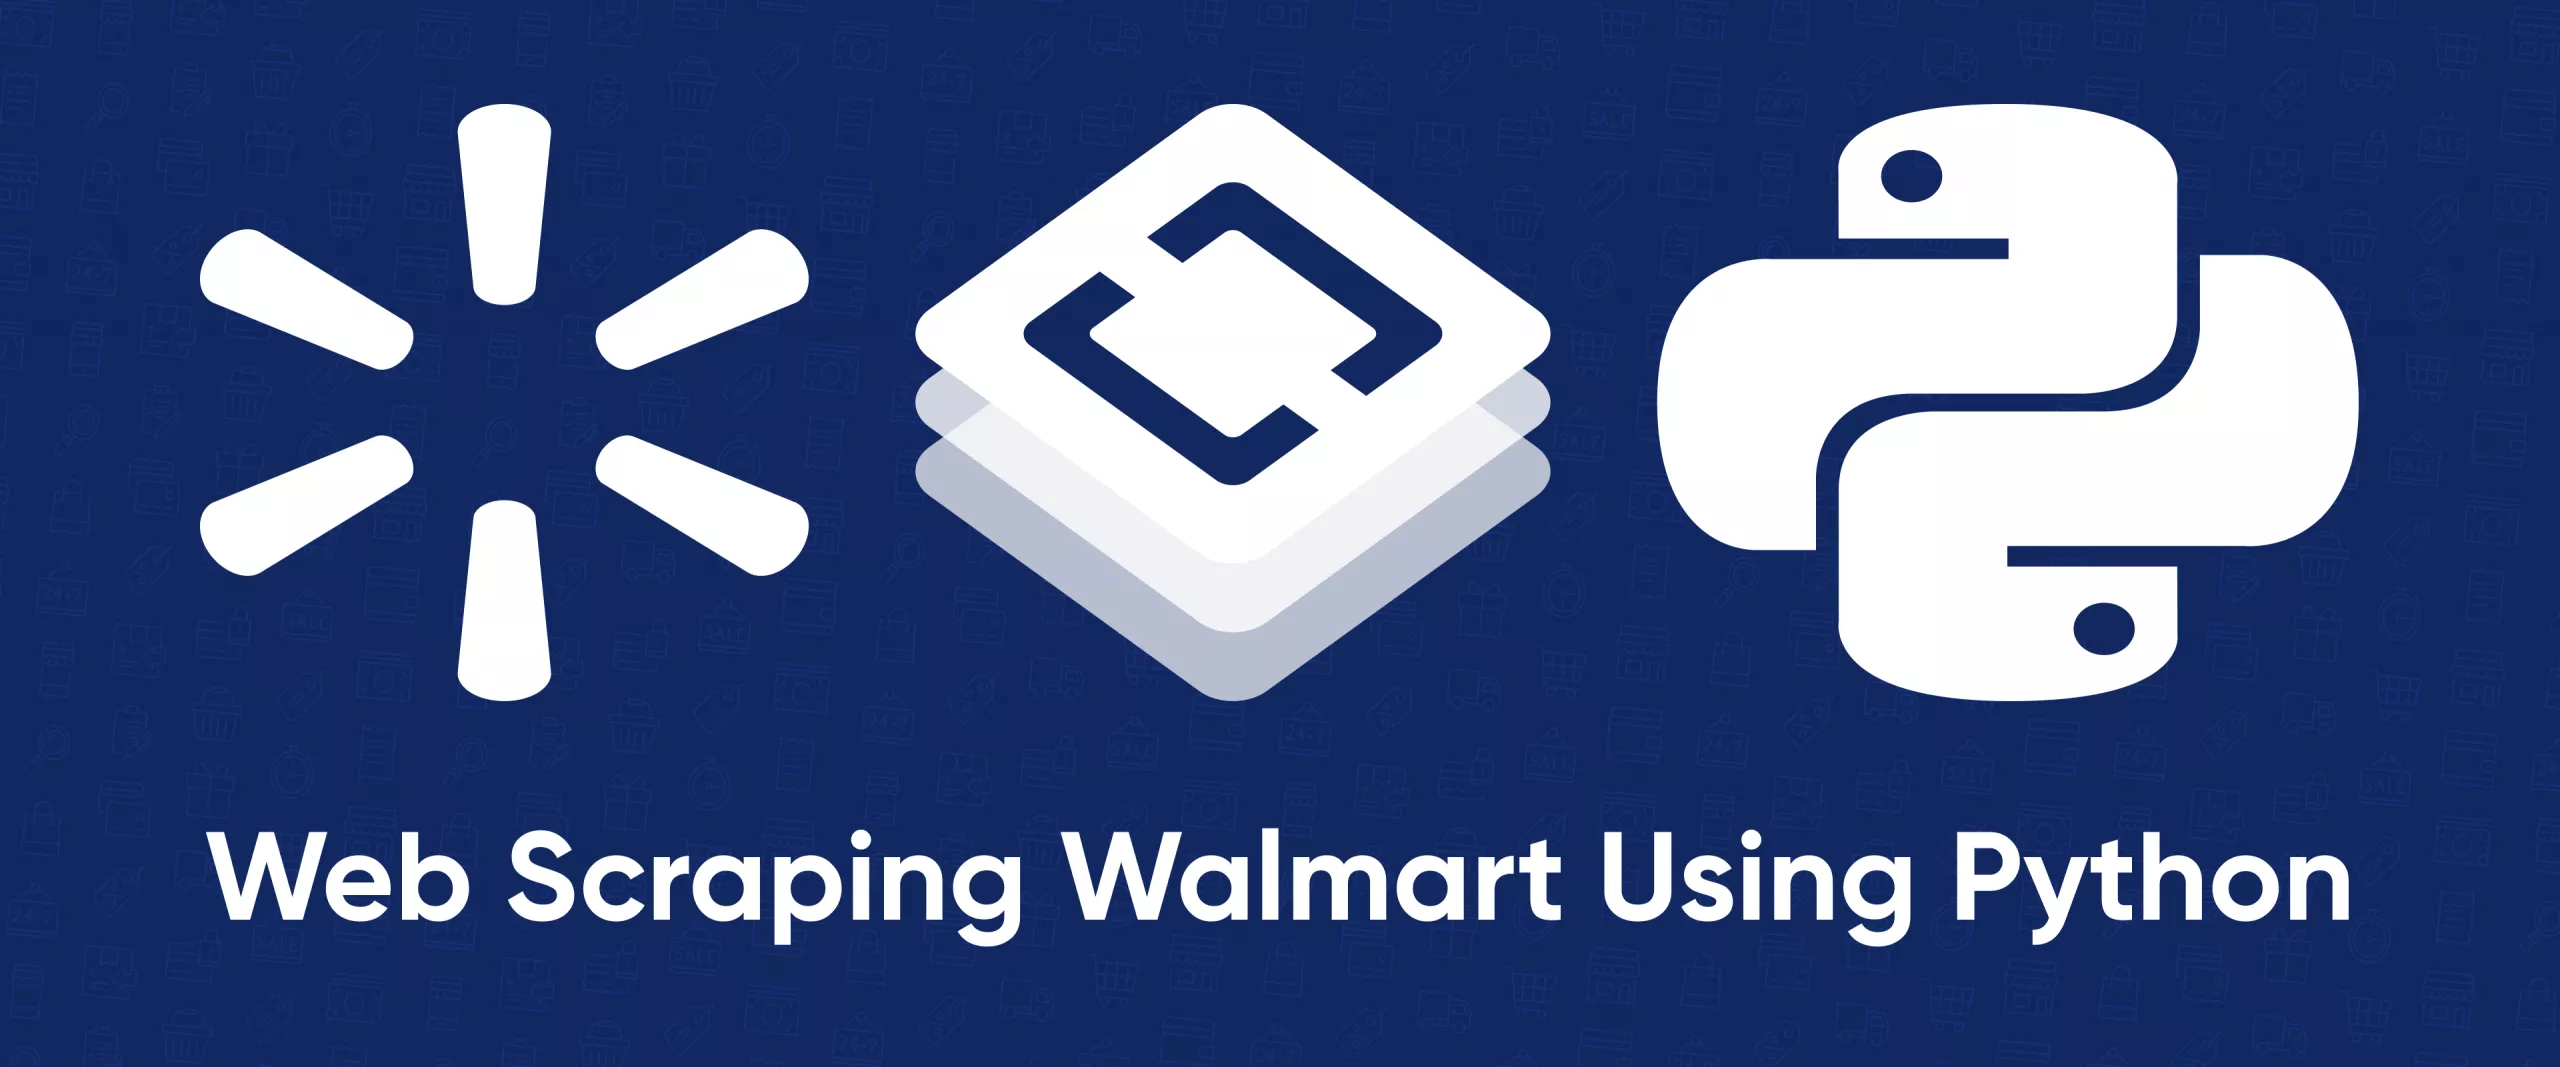 Web Scraping Walmart Using Python: Understanding How to Scrape Data Quickly and Easily